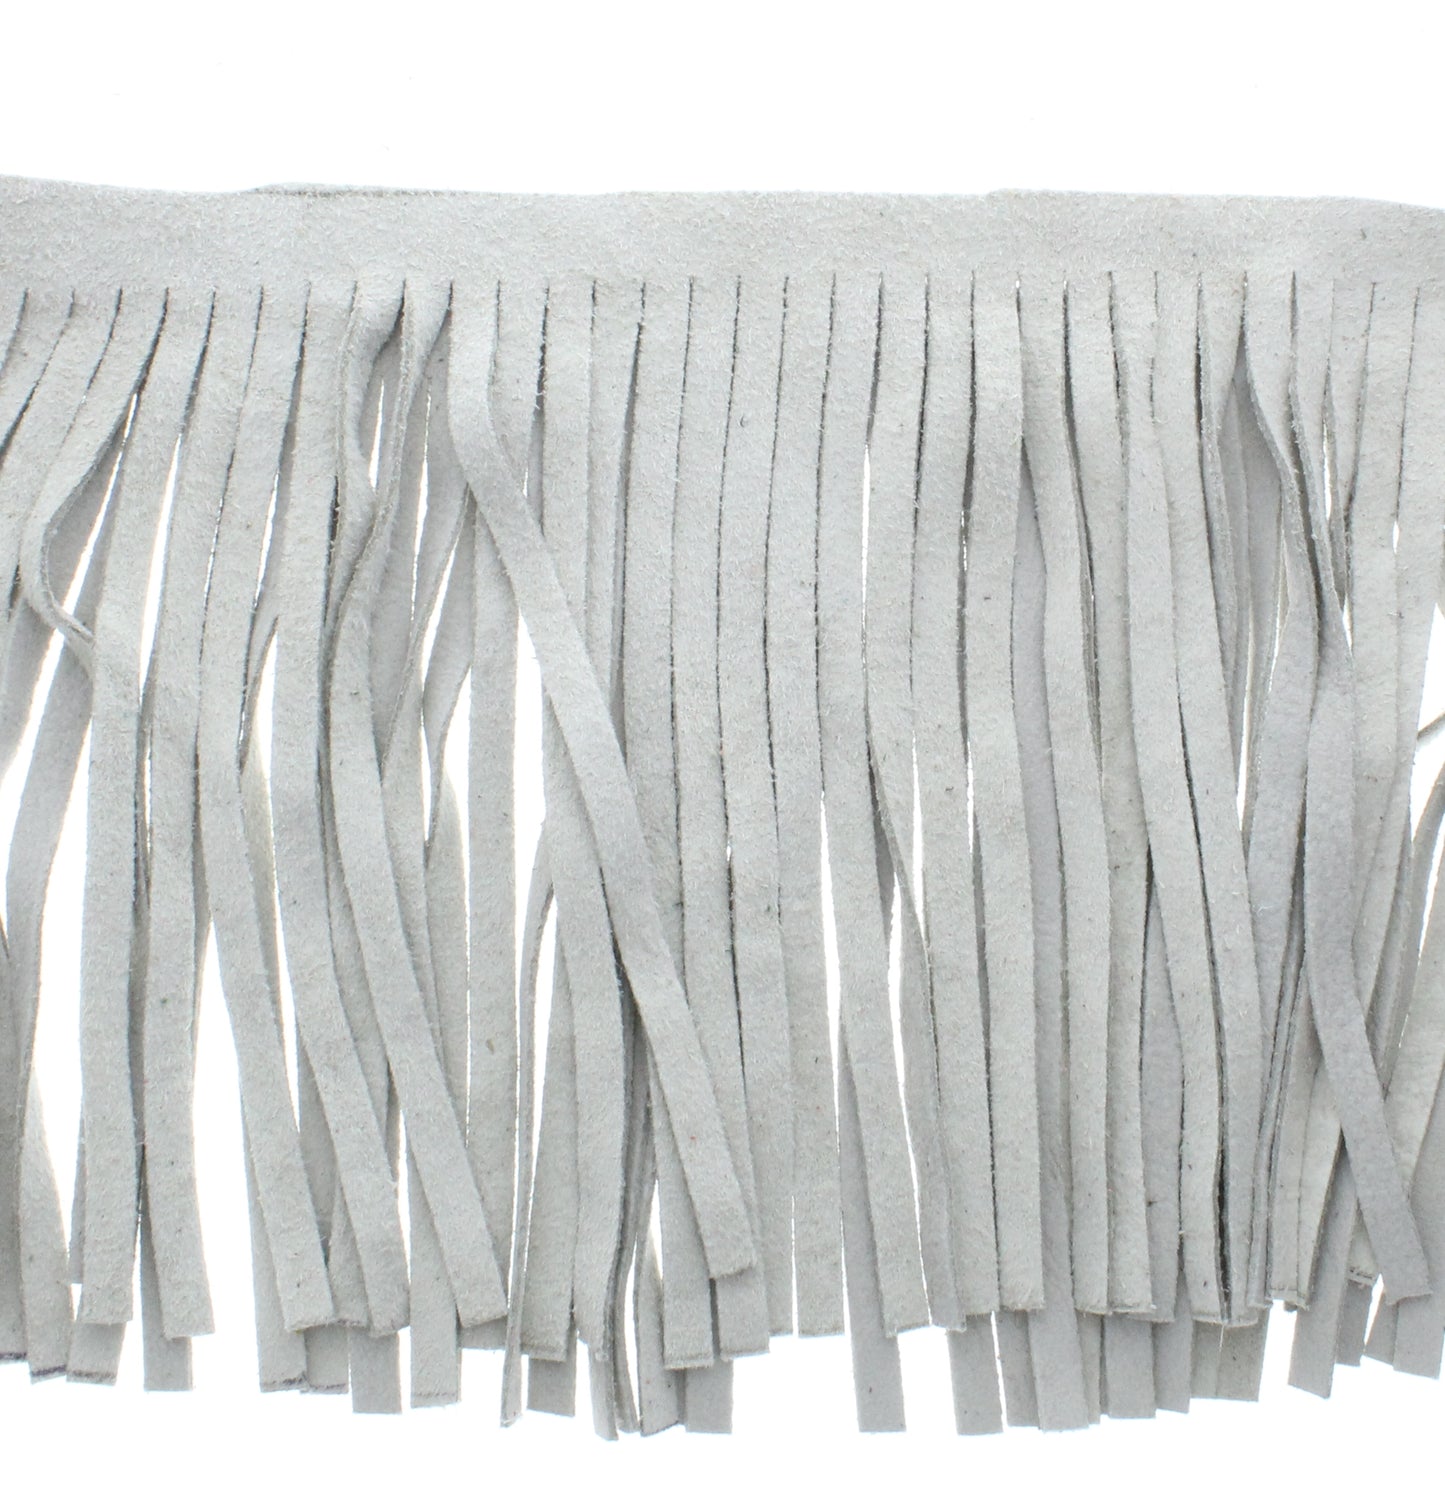 Off-White Leather Fringe, Made in the USA, sold by ft.